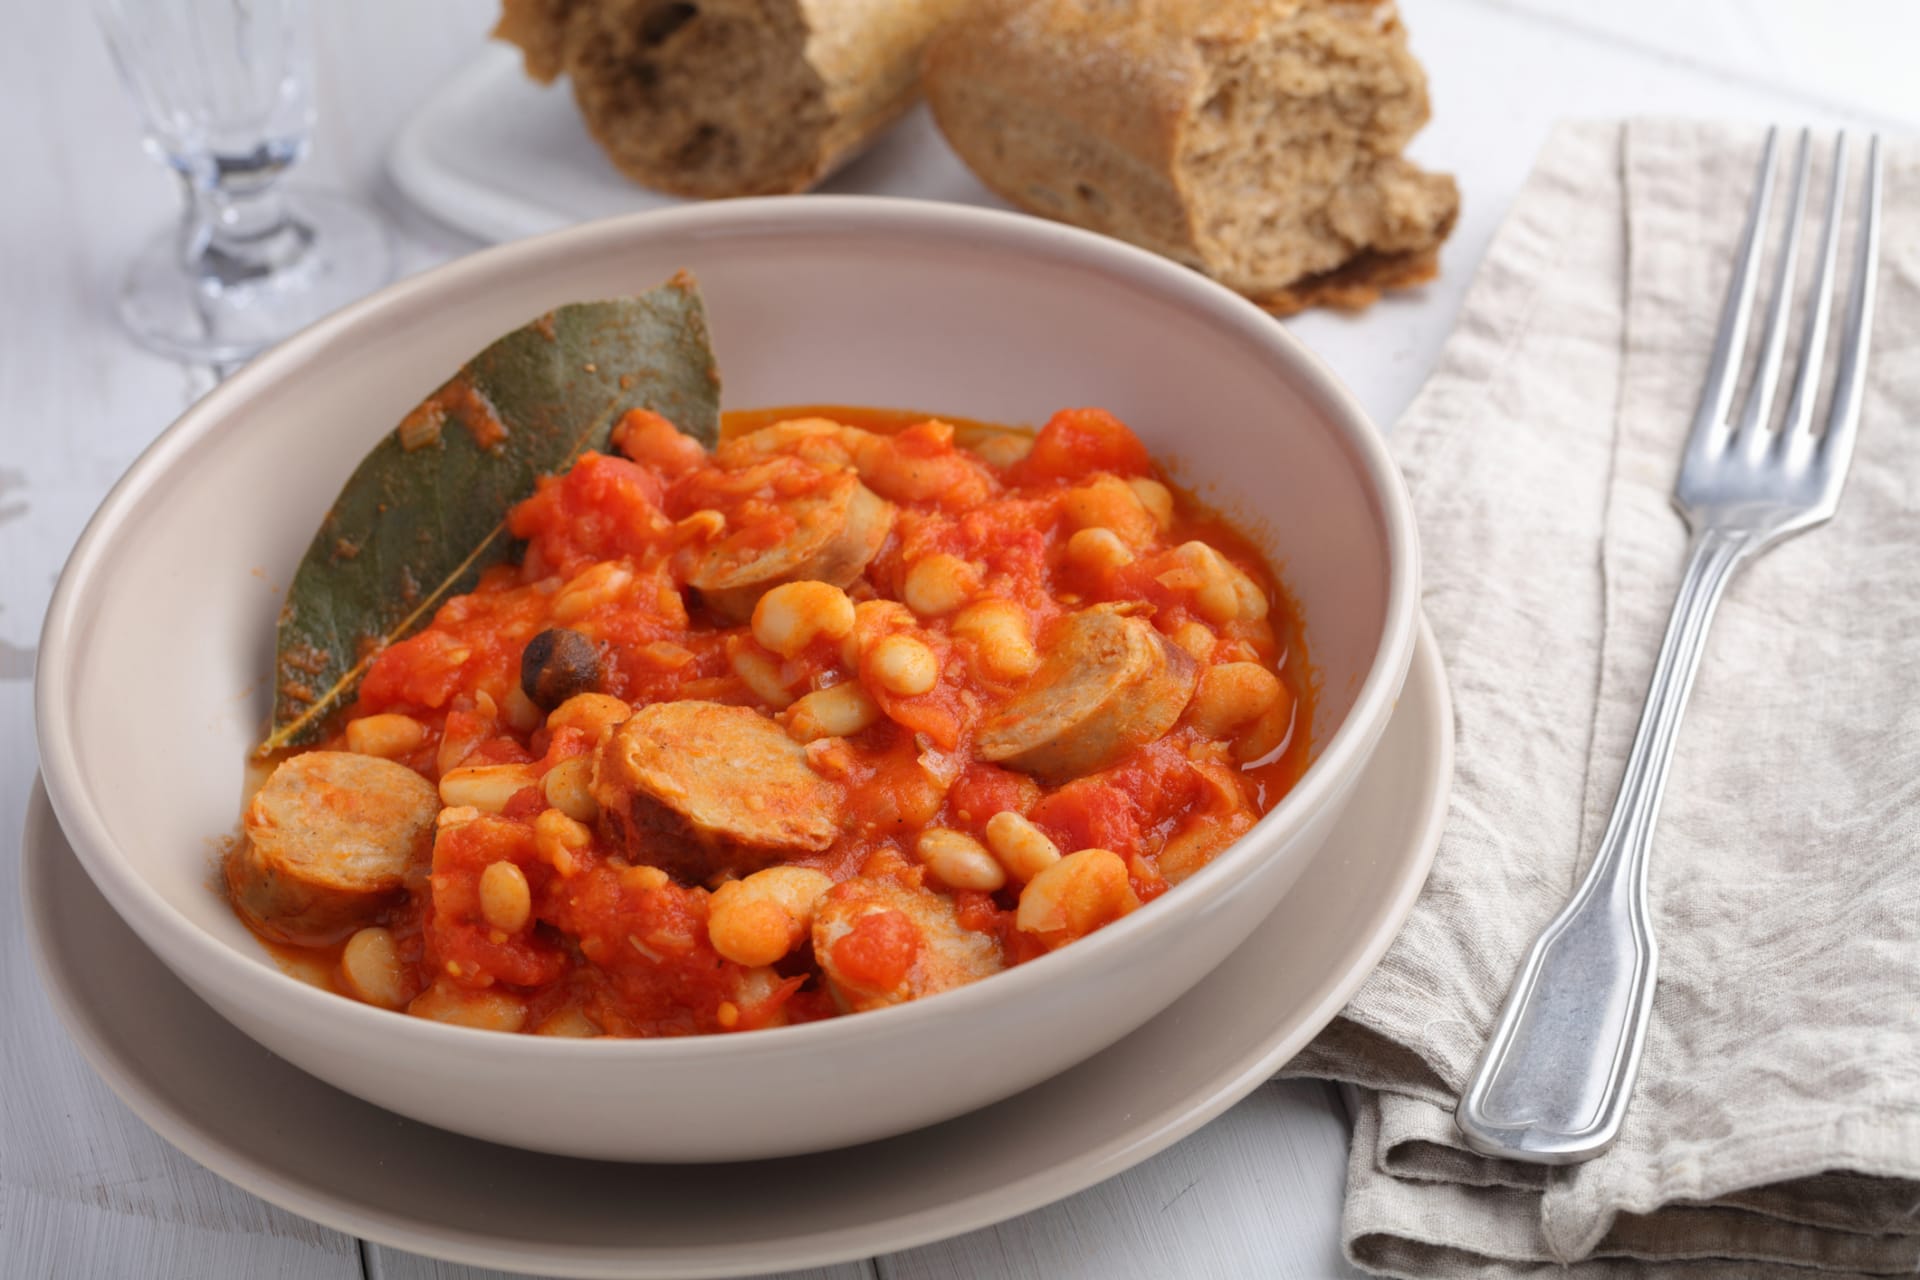 Trenčany sausage with beans - an improved home recipe for the Tramp classic